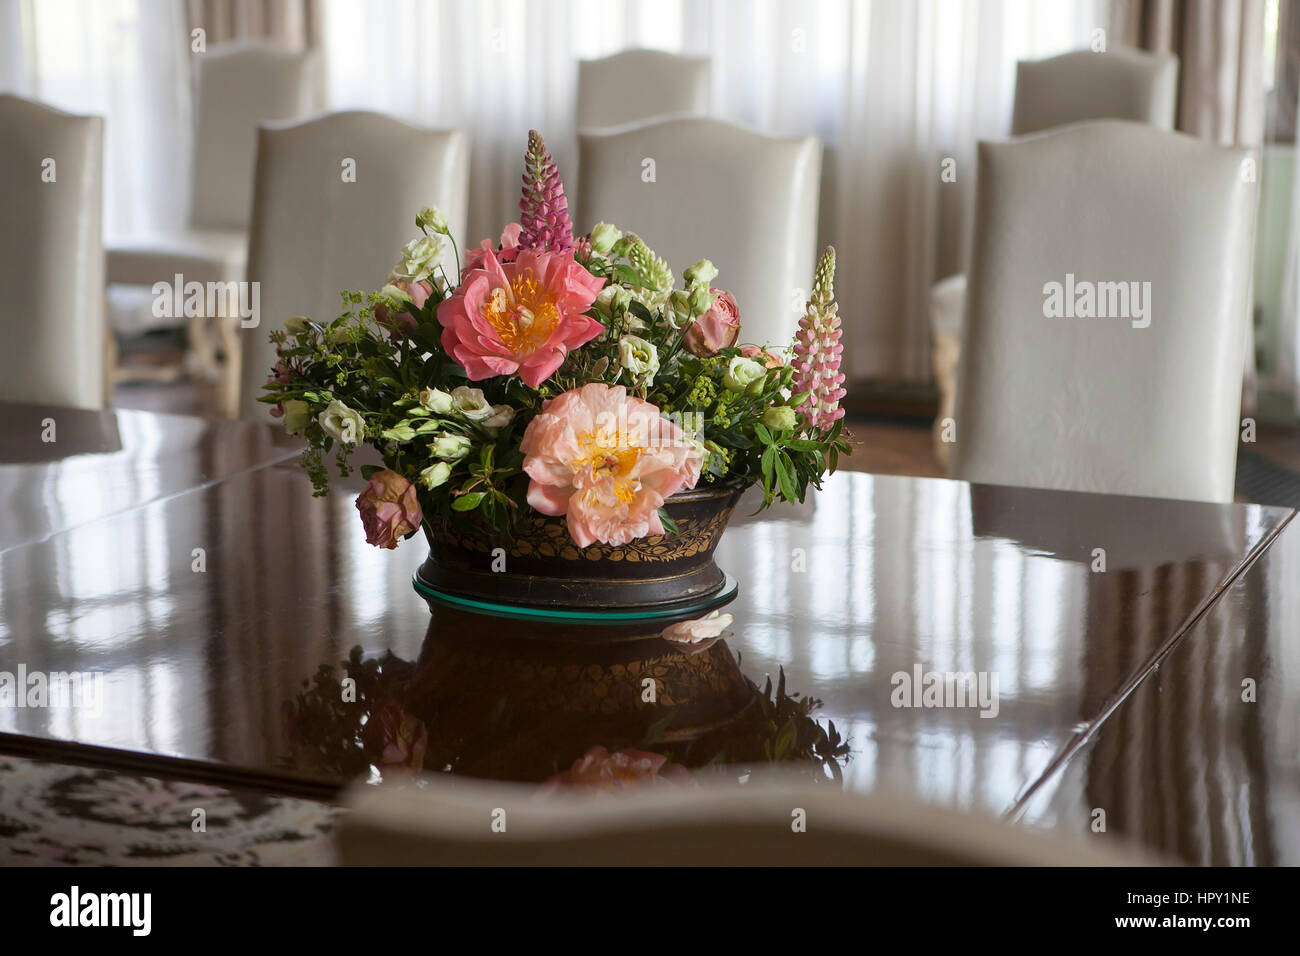 delicate bouquet of anemones, lilies, lupine, freesia stands on a glass table in the English interior Stock Photo